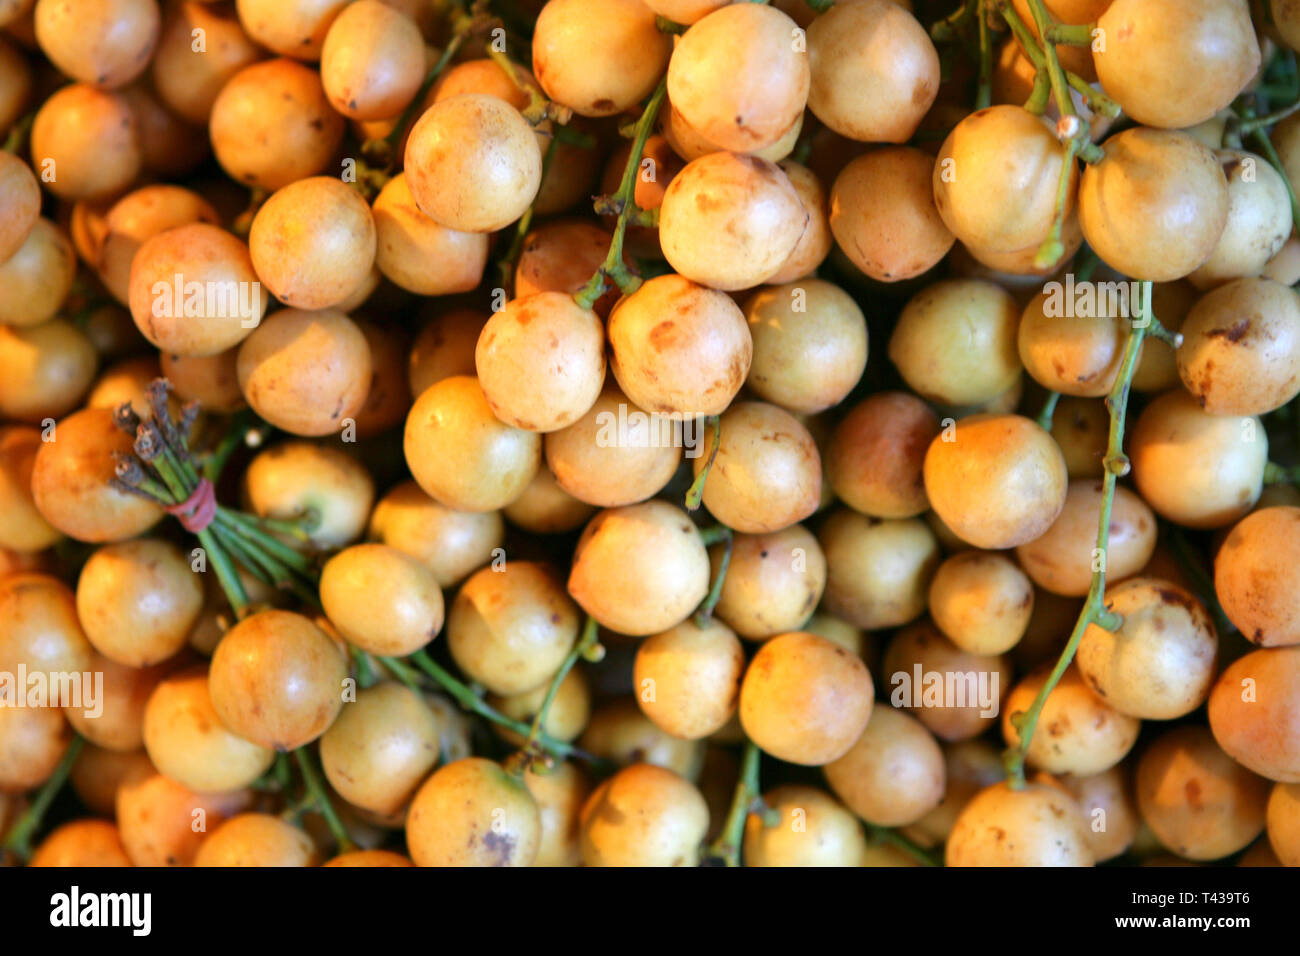 Longkong fruits, Aglaia dookoo griffin, on a market in Thailand, Southeast Asia, Asia Stock Photo